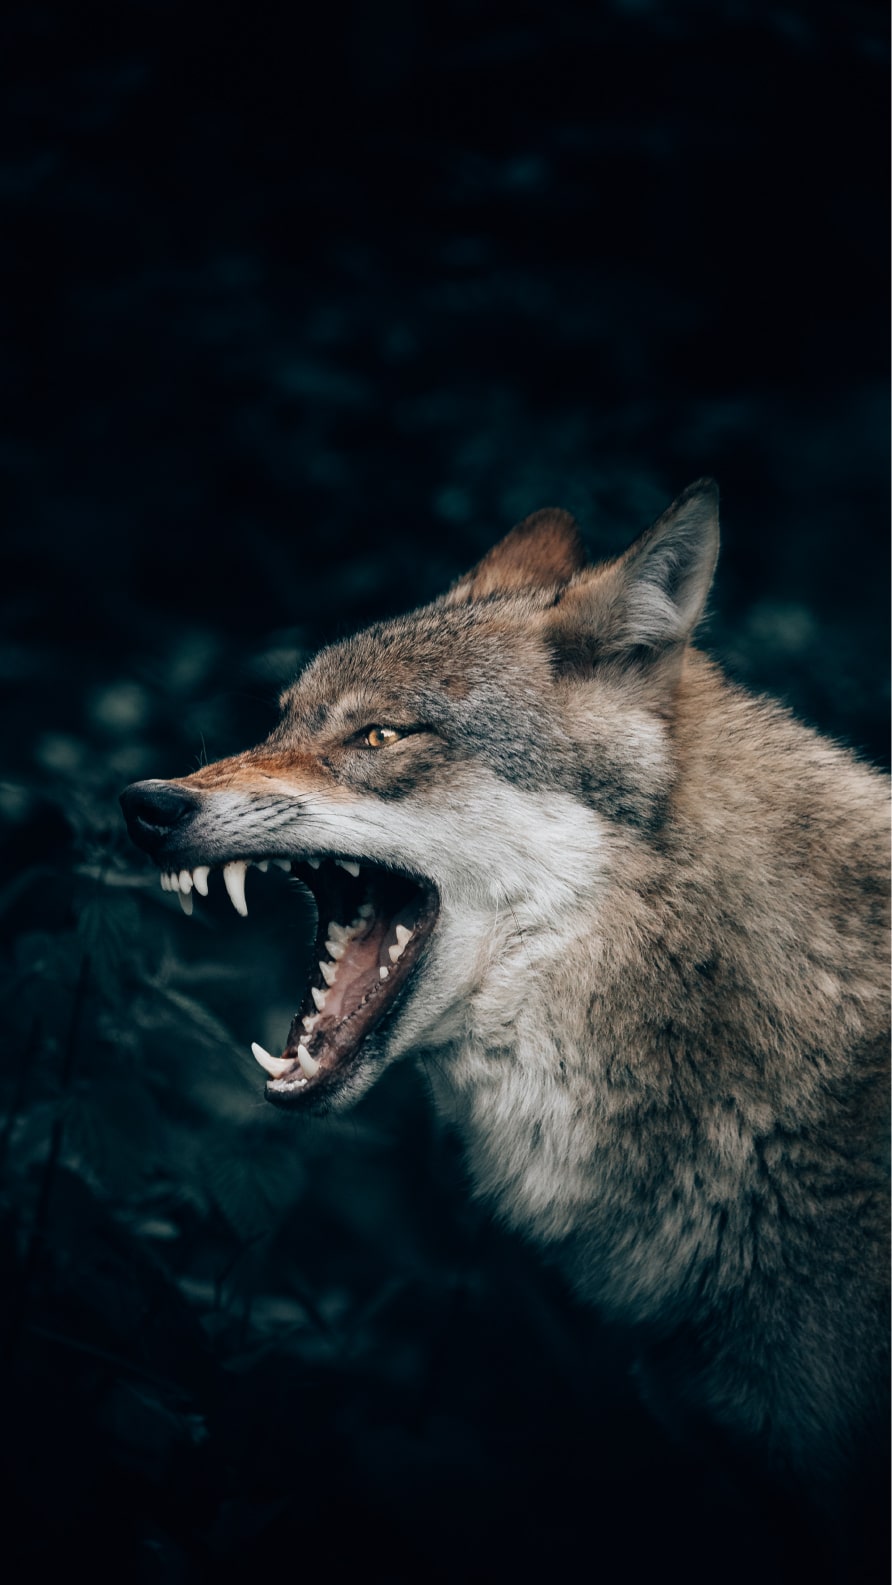 iPhone wallpapers featuring wolves